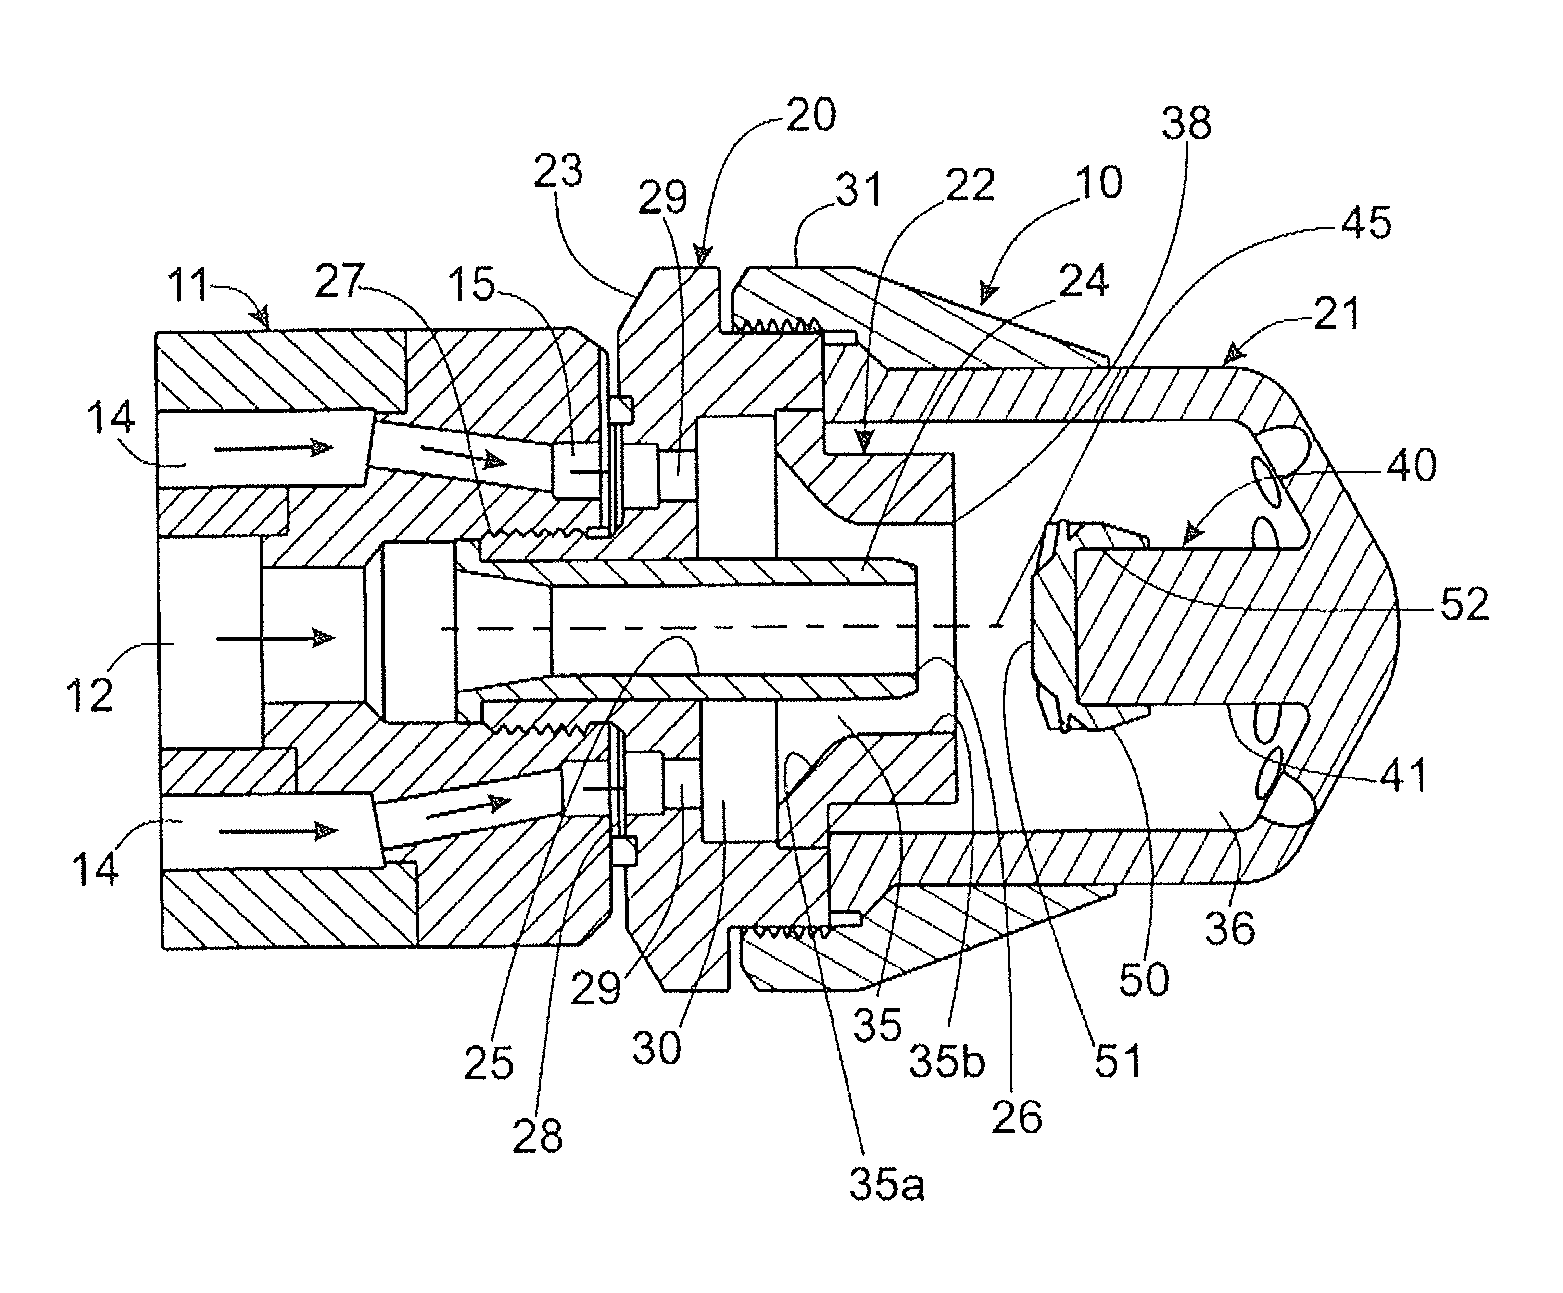 Spray nozzle assembly with impingement post-diffuser